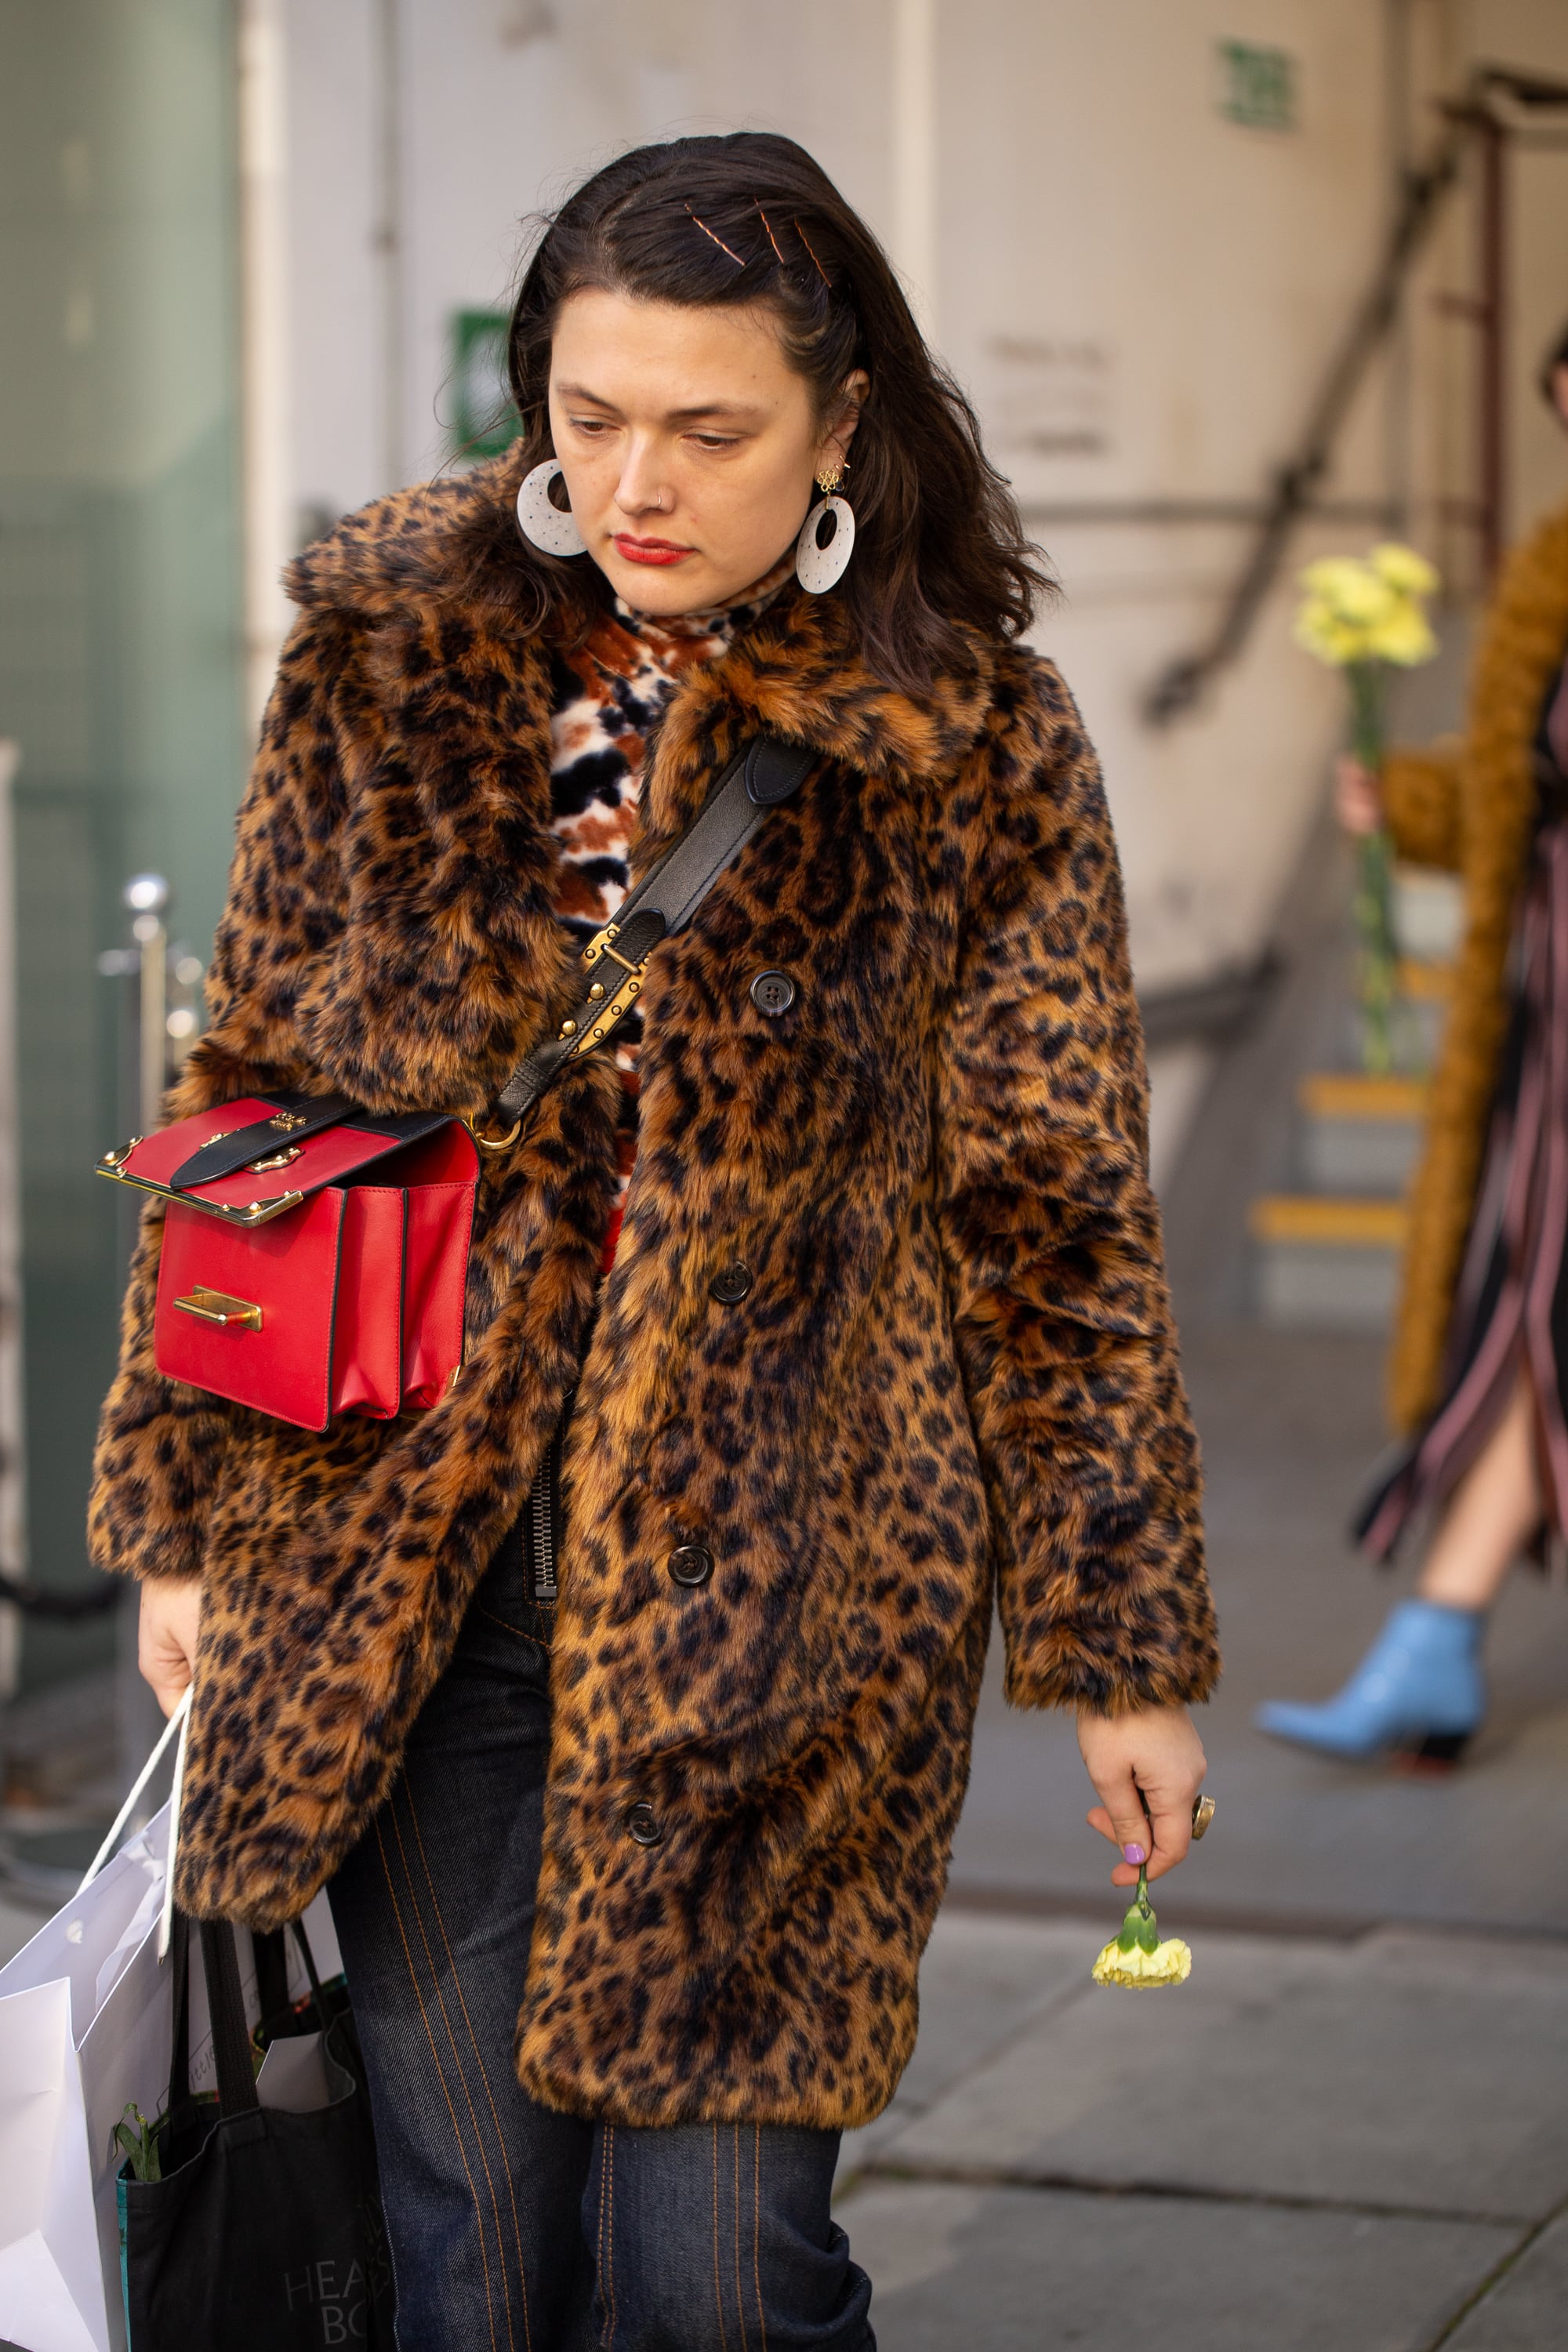 Style Your Leopard-Print Coat With: A Printed Top, Jeans, Bright Bag, and  Statement Earrings | How to Wear a Leopard Coat, Plus the Coolest One  You'll Find Under $100 | POPSUGAR Fashion